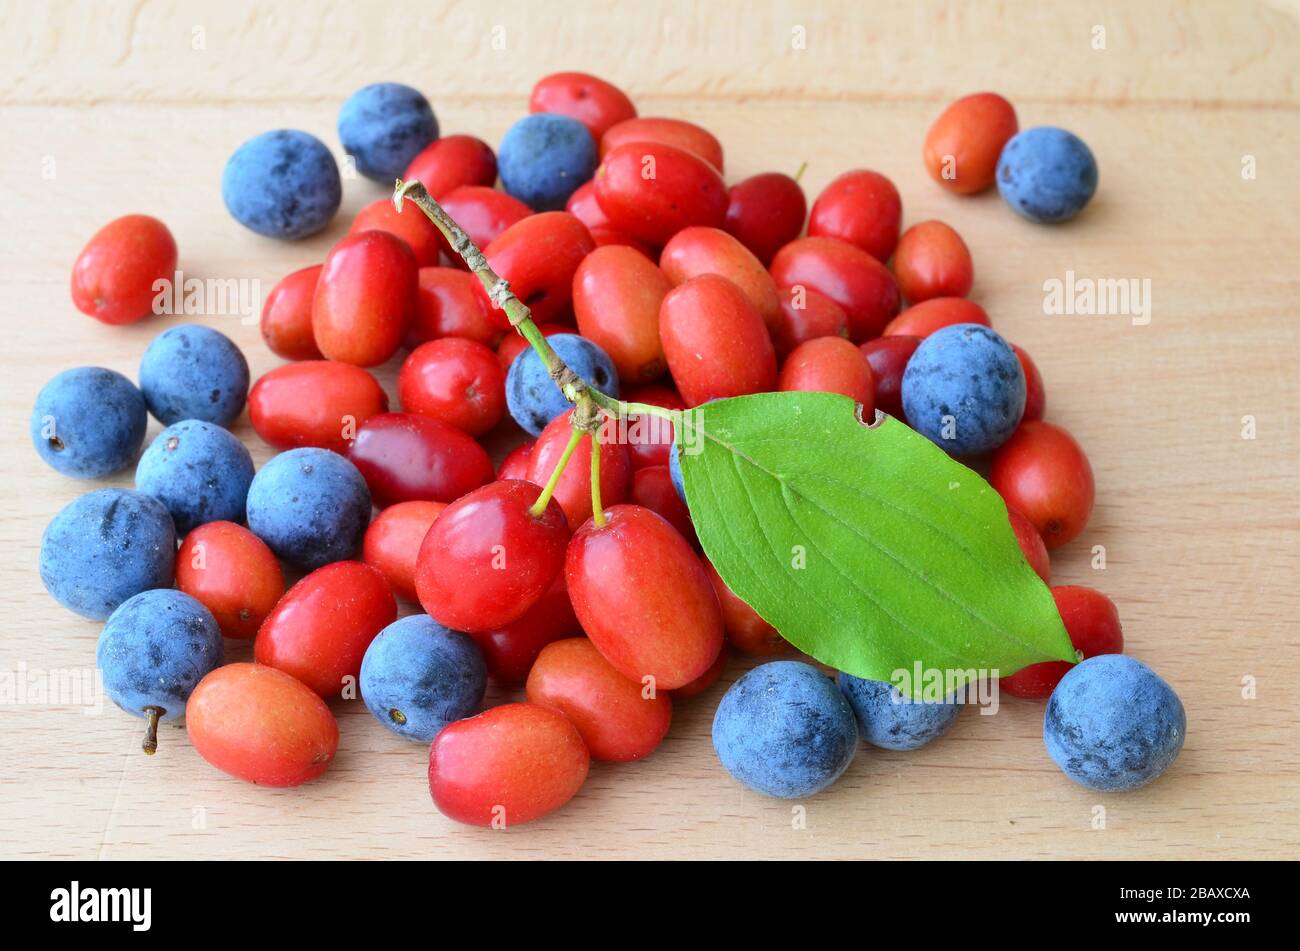 Cornelian cherries or Cornus mas and sloes or Prunus spinosa, mixed on the table, view from above Stock Photo